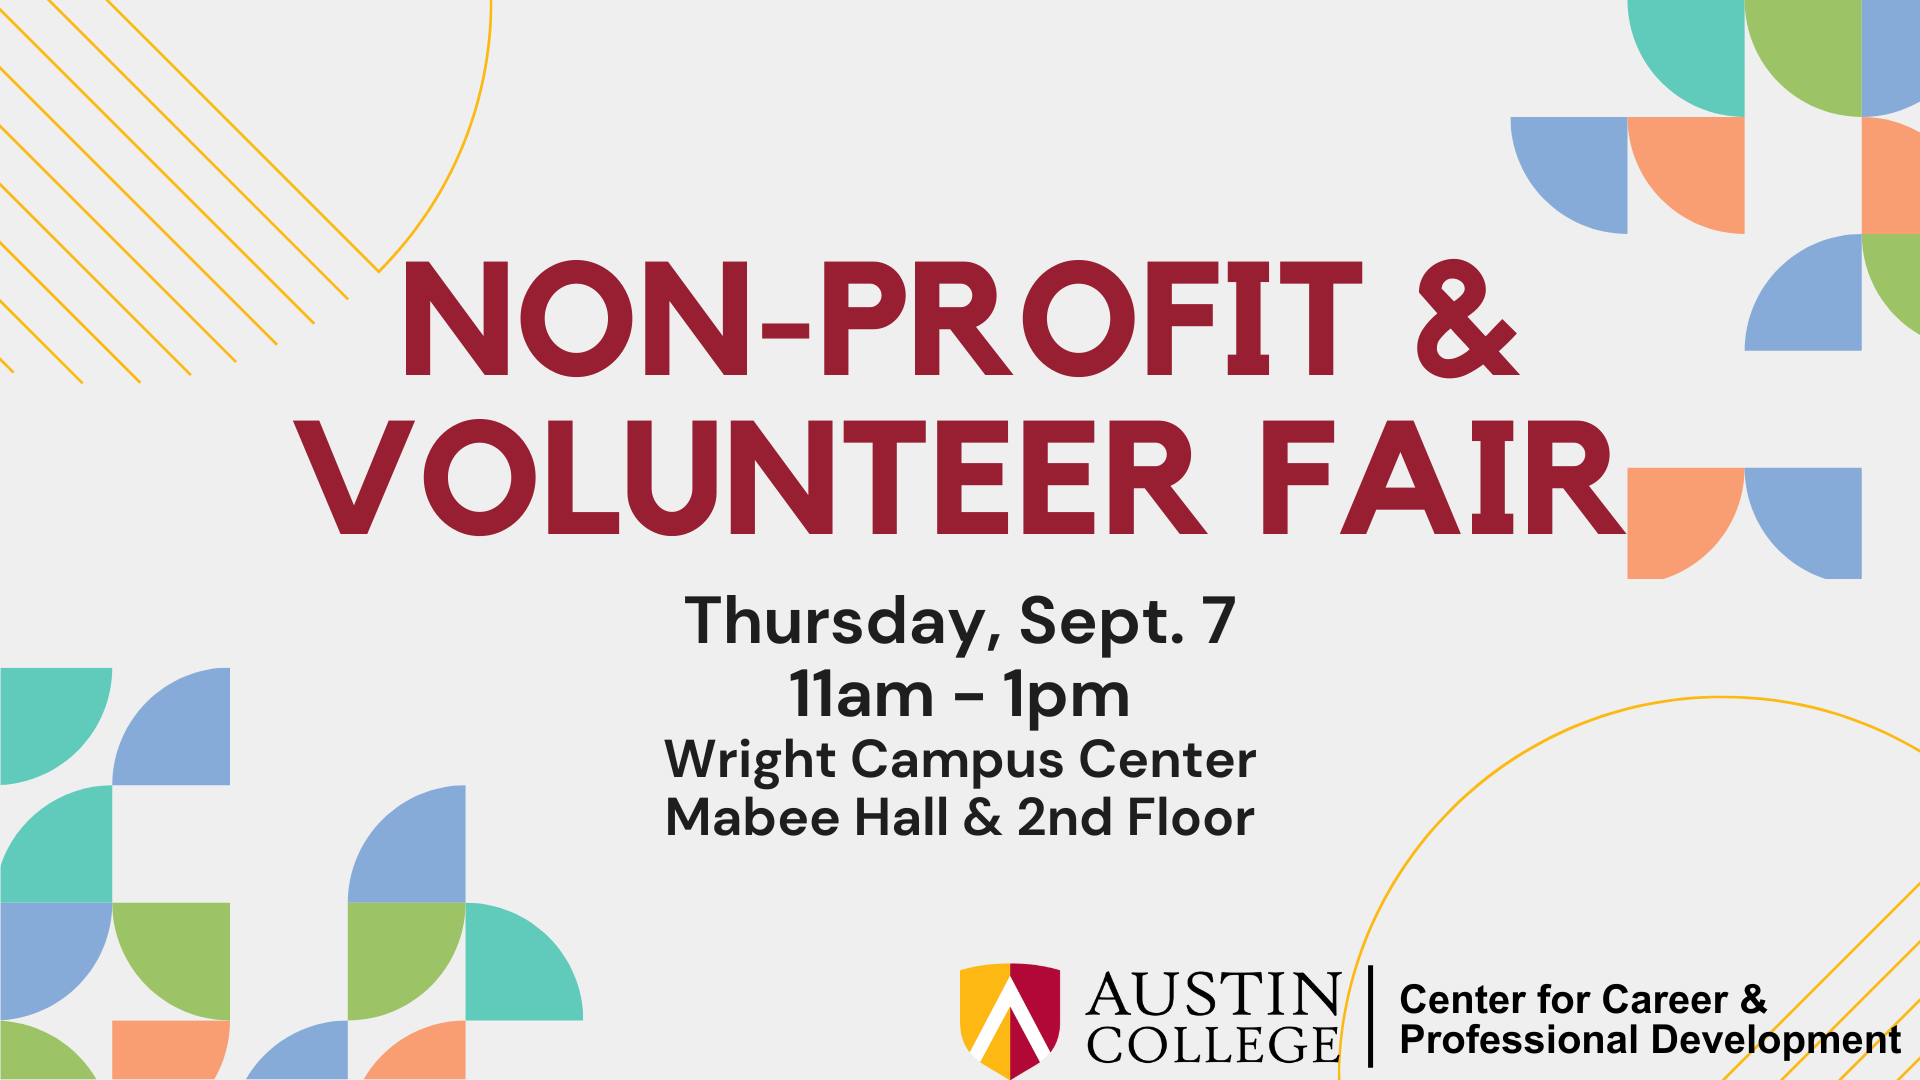 Non-Profit & Volunteer Fair
Thursday, Sept. 7
11am - 1pm
Wright Campus Center
Mabee Hall & 2nd Floor